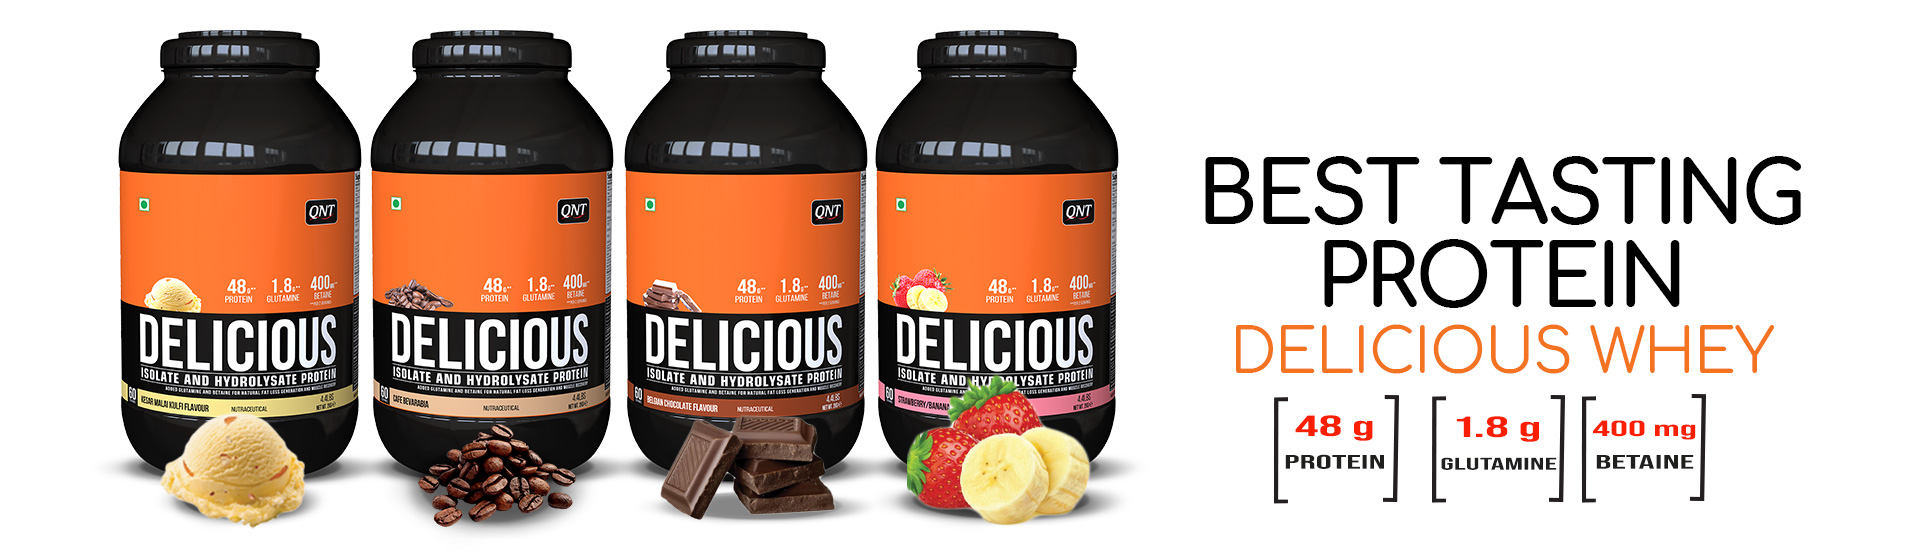 Delicious Whey Blend Protein